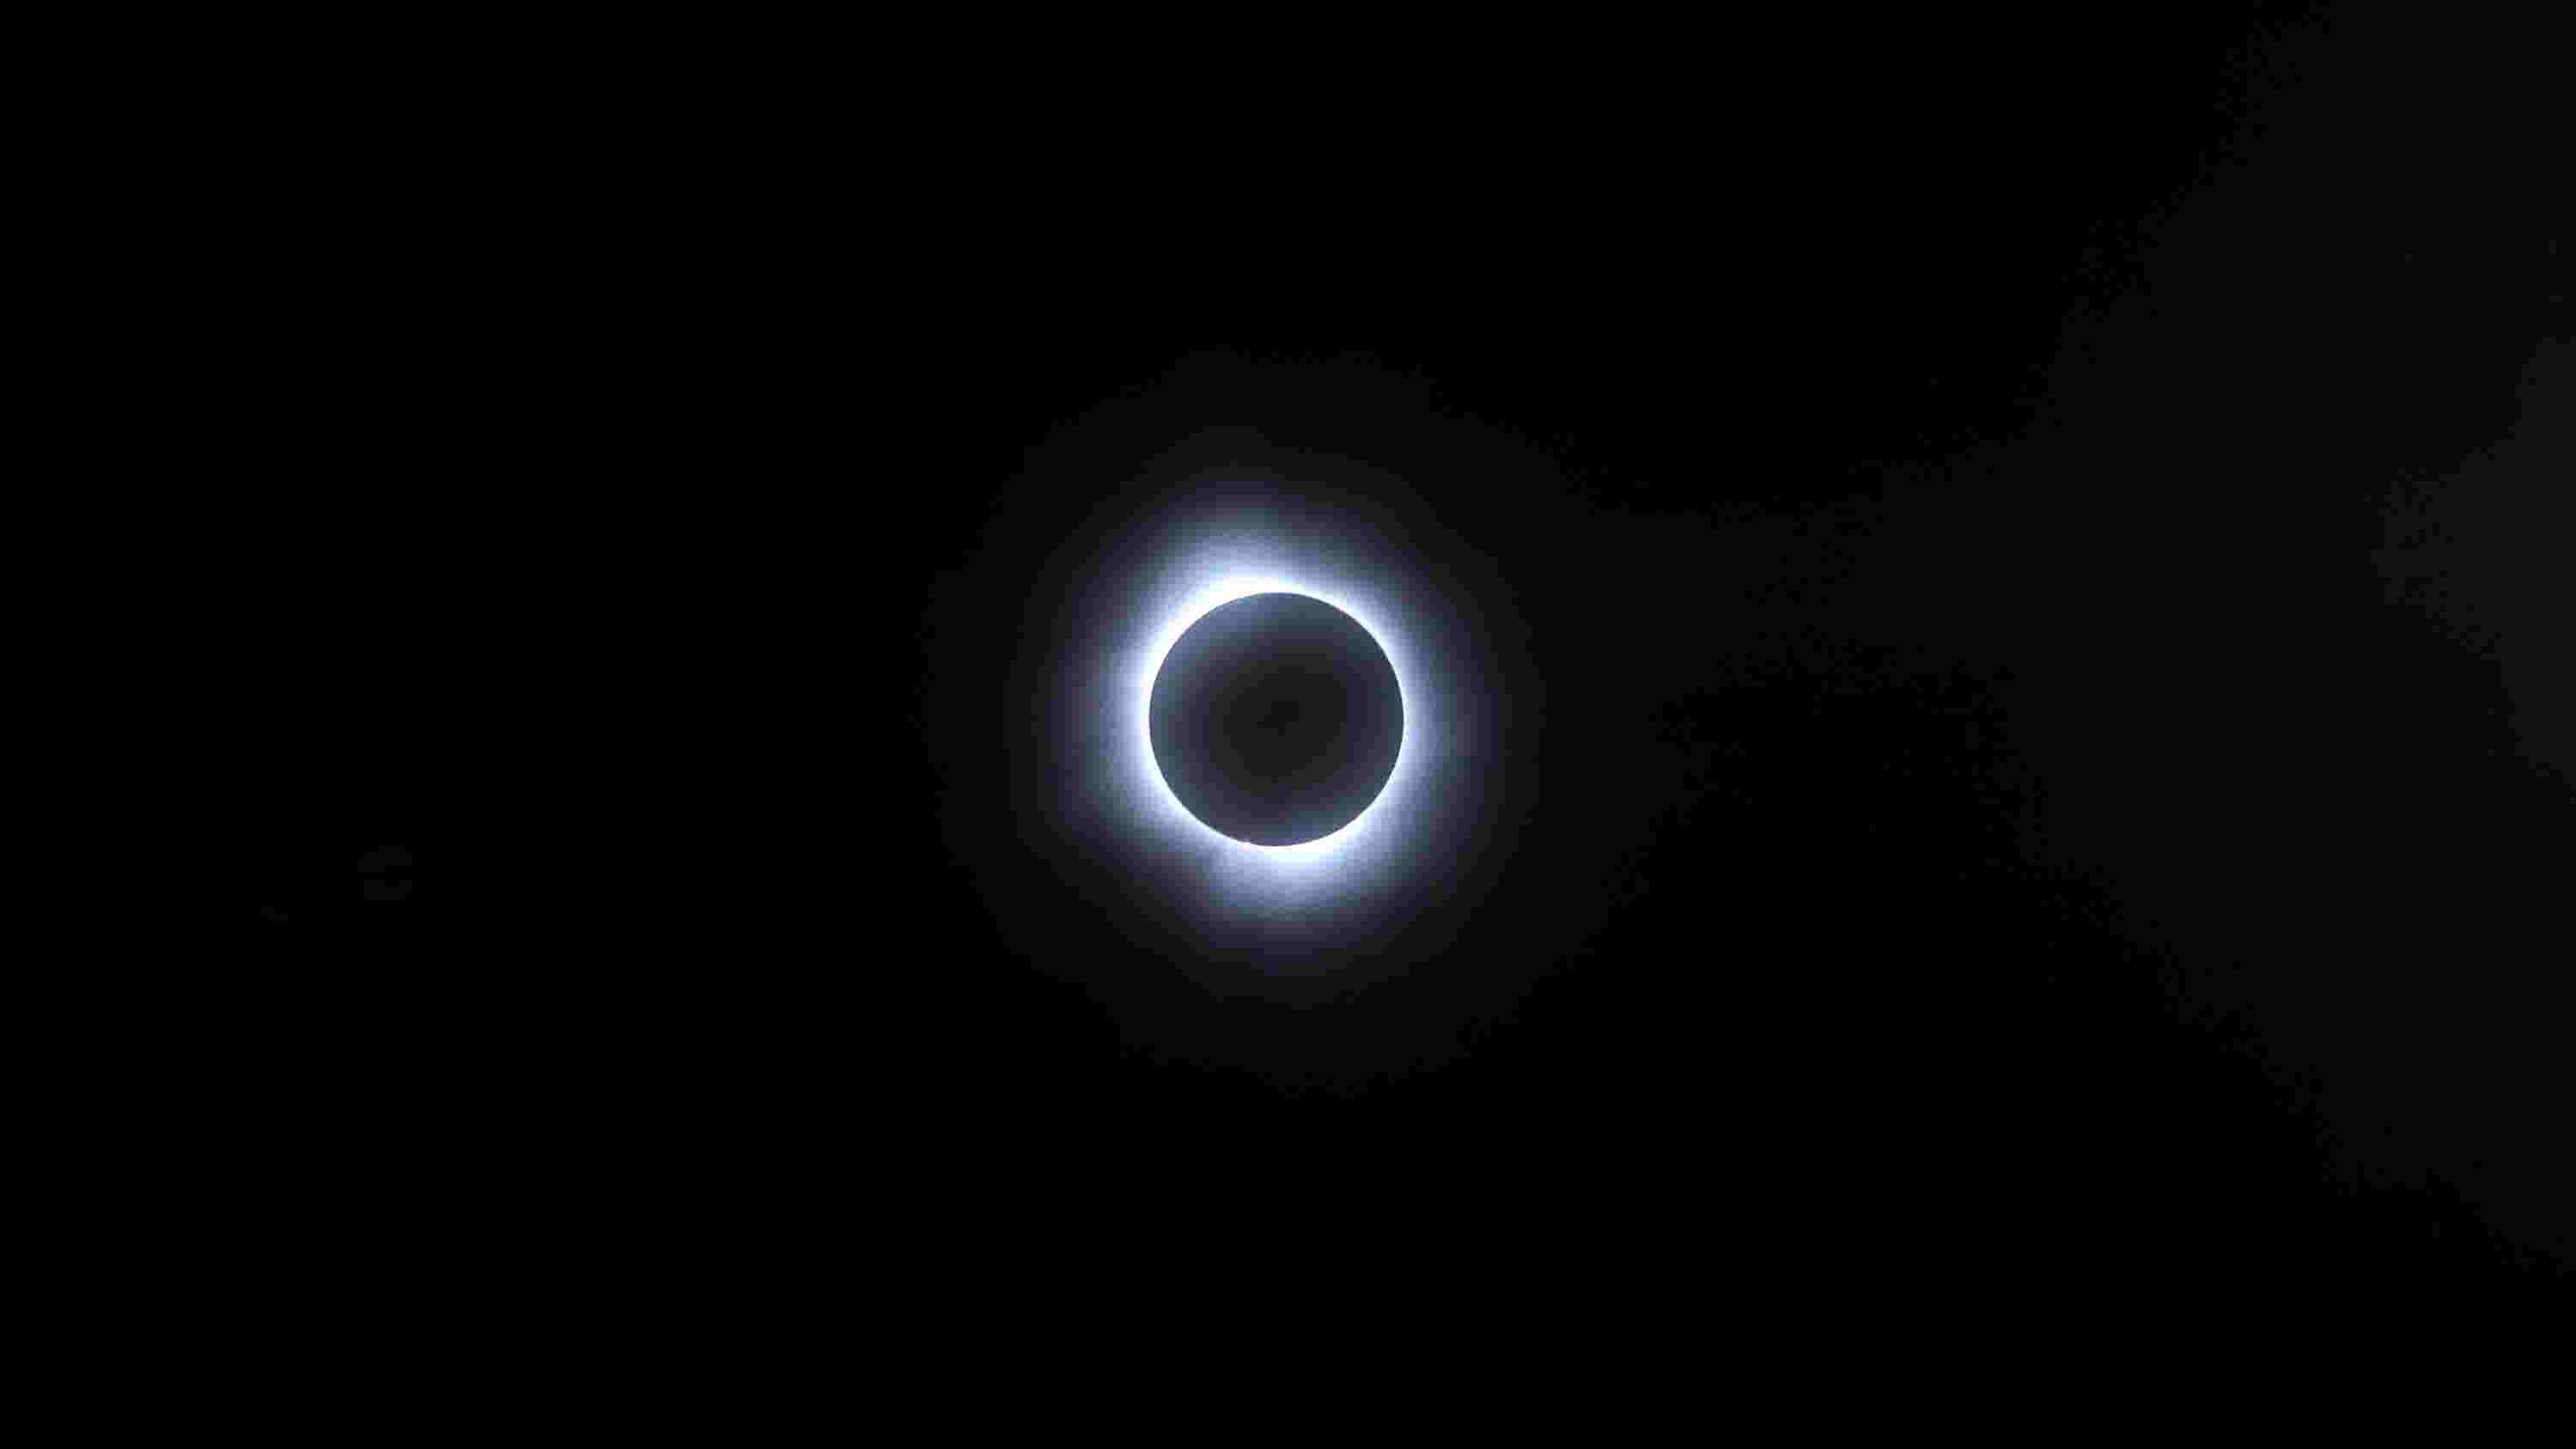 Viewing totality at the Akron Art Museum during a total solar eclipse